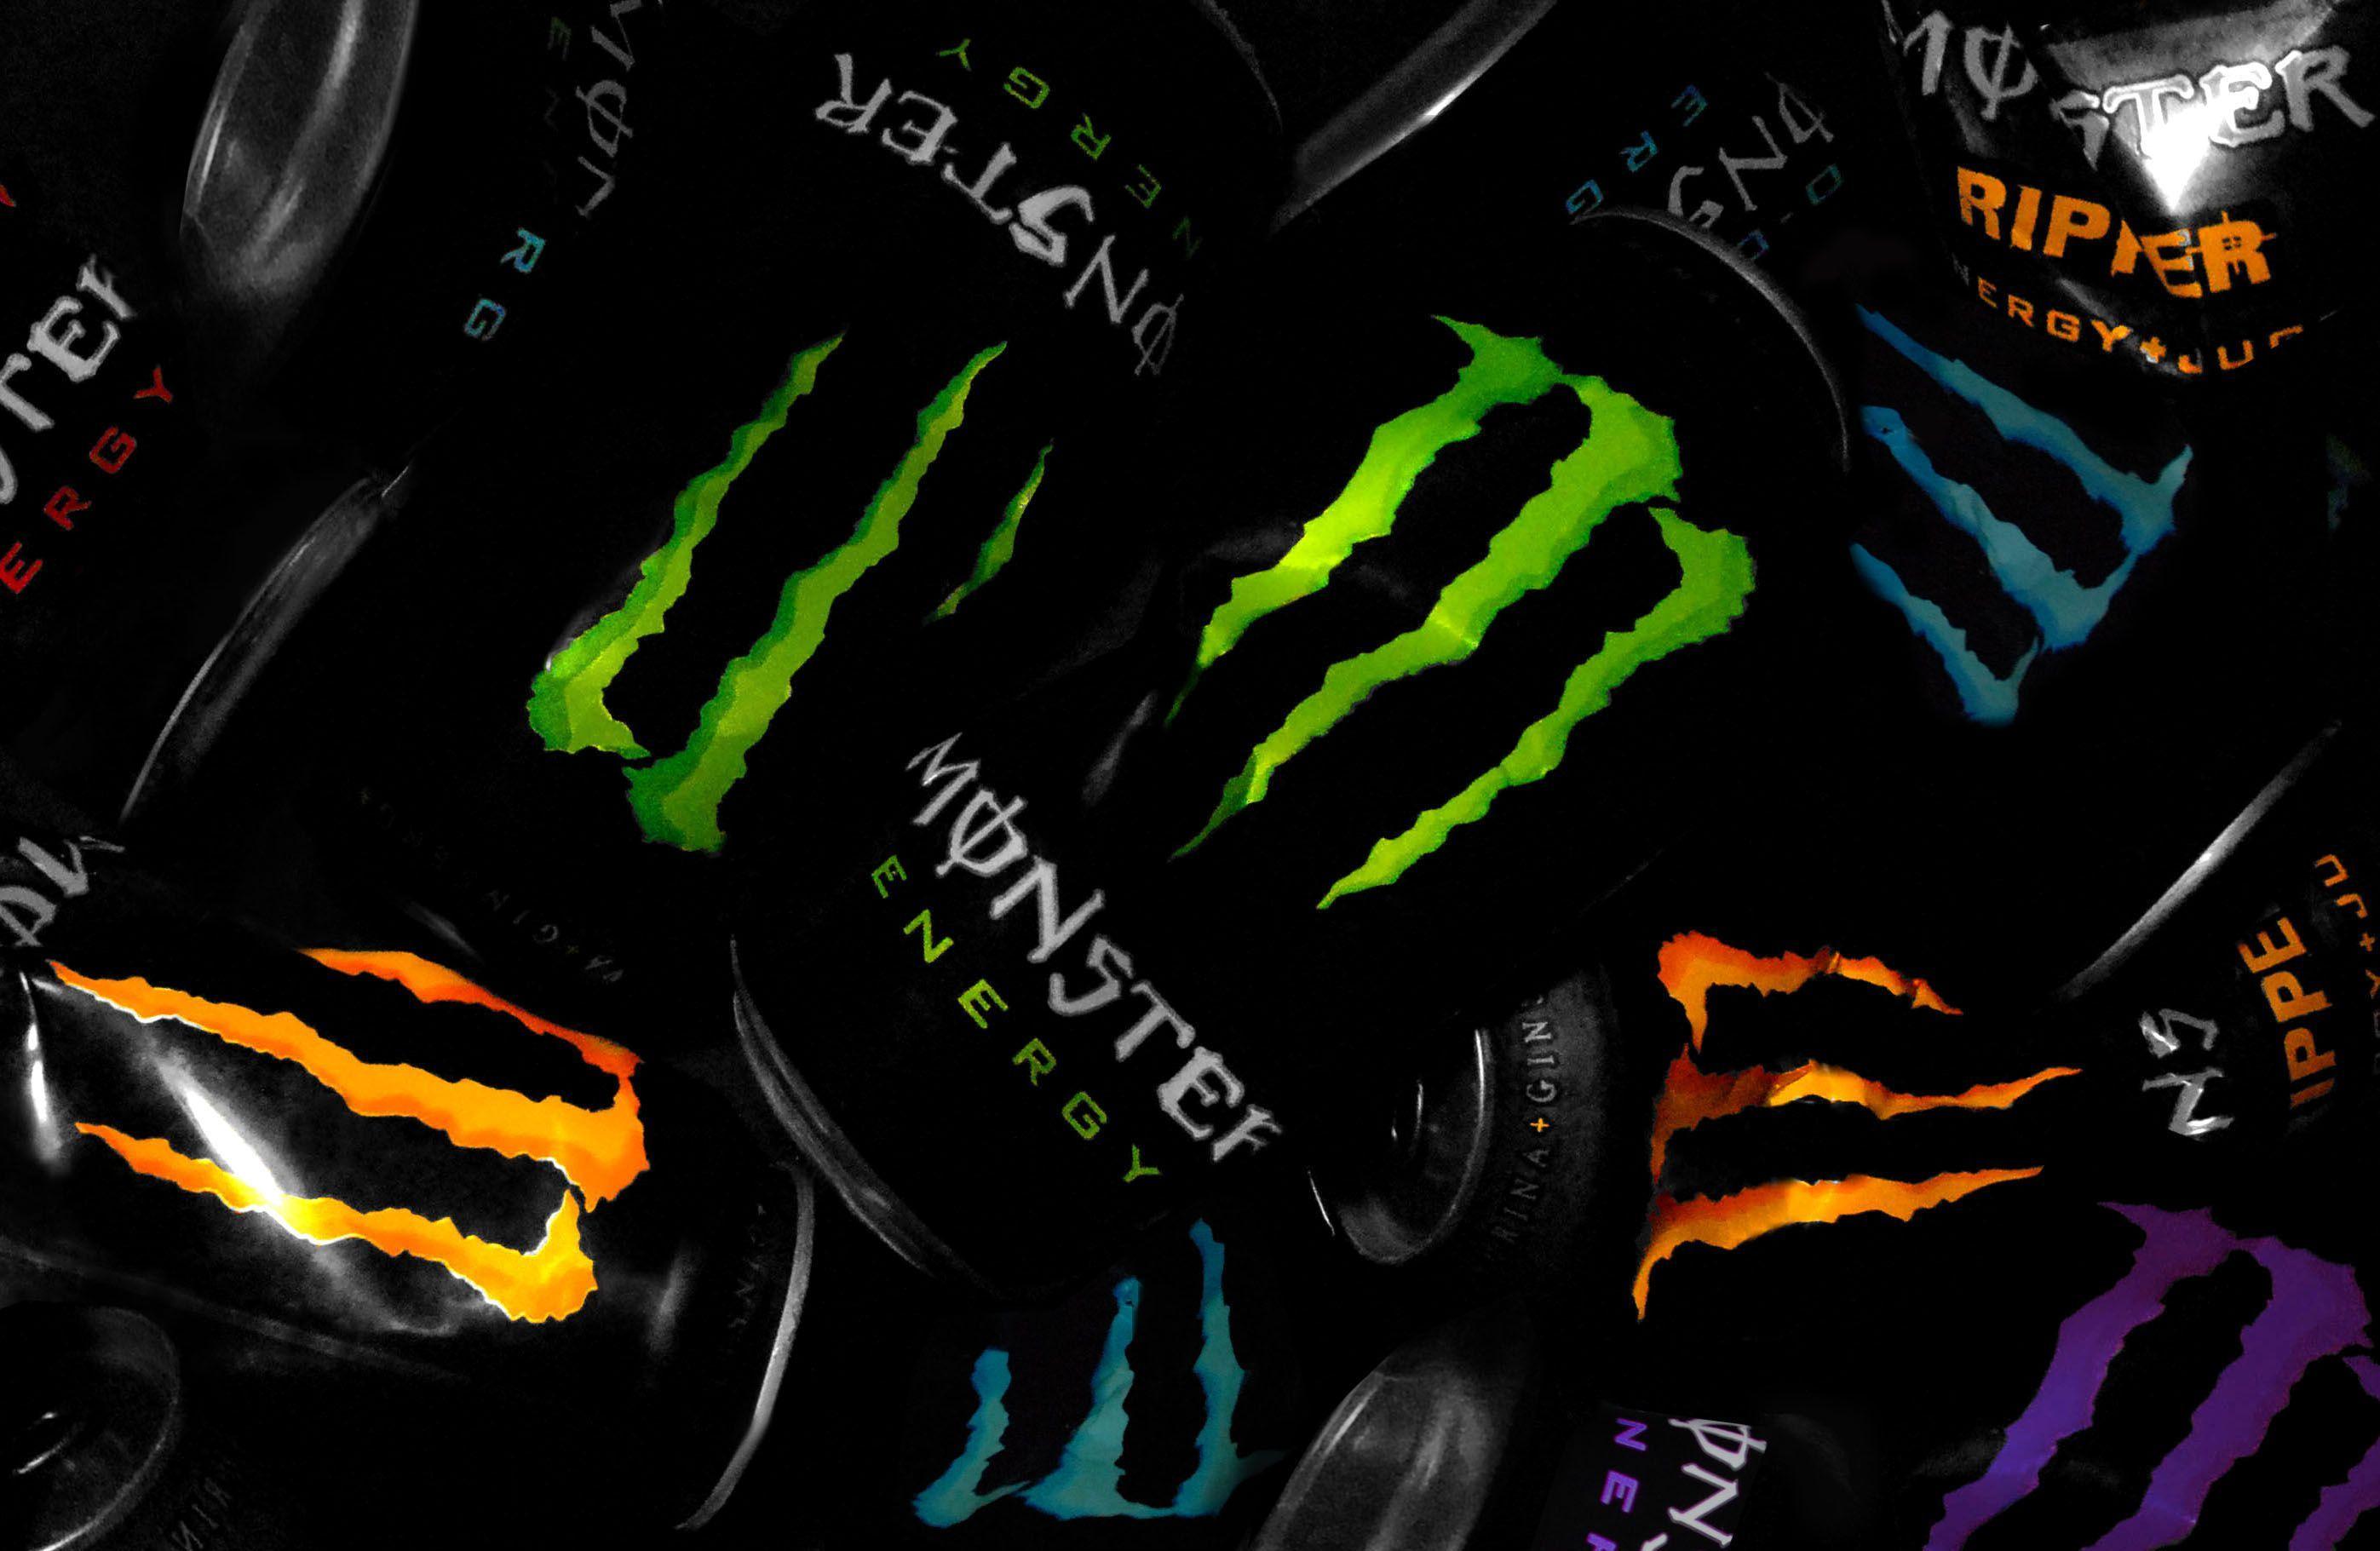 Many Monster Energy Tins Photo Picture HD Wallpaper Free. wallpaper